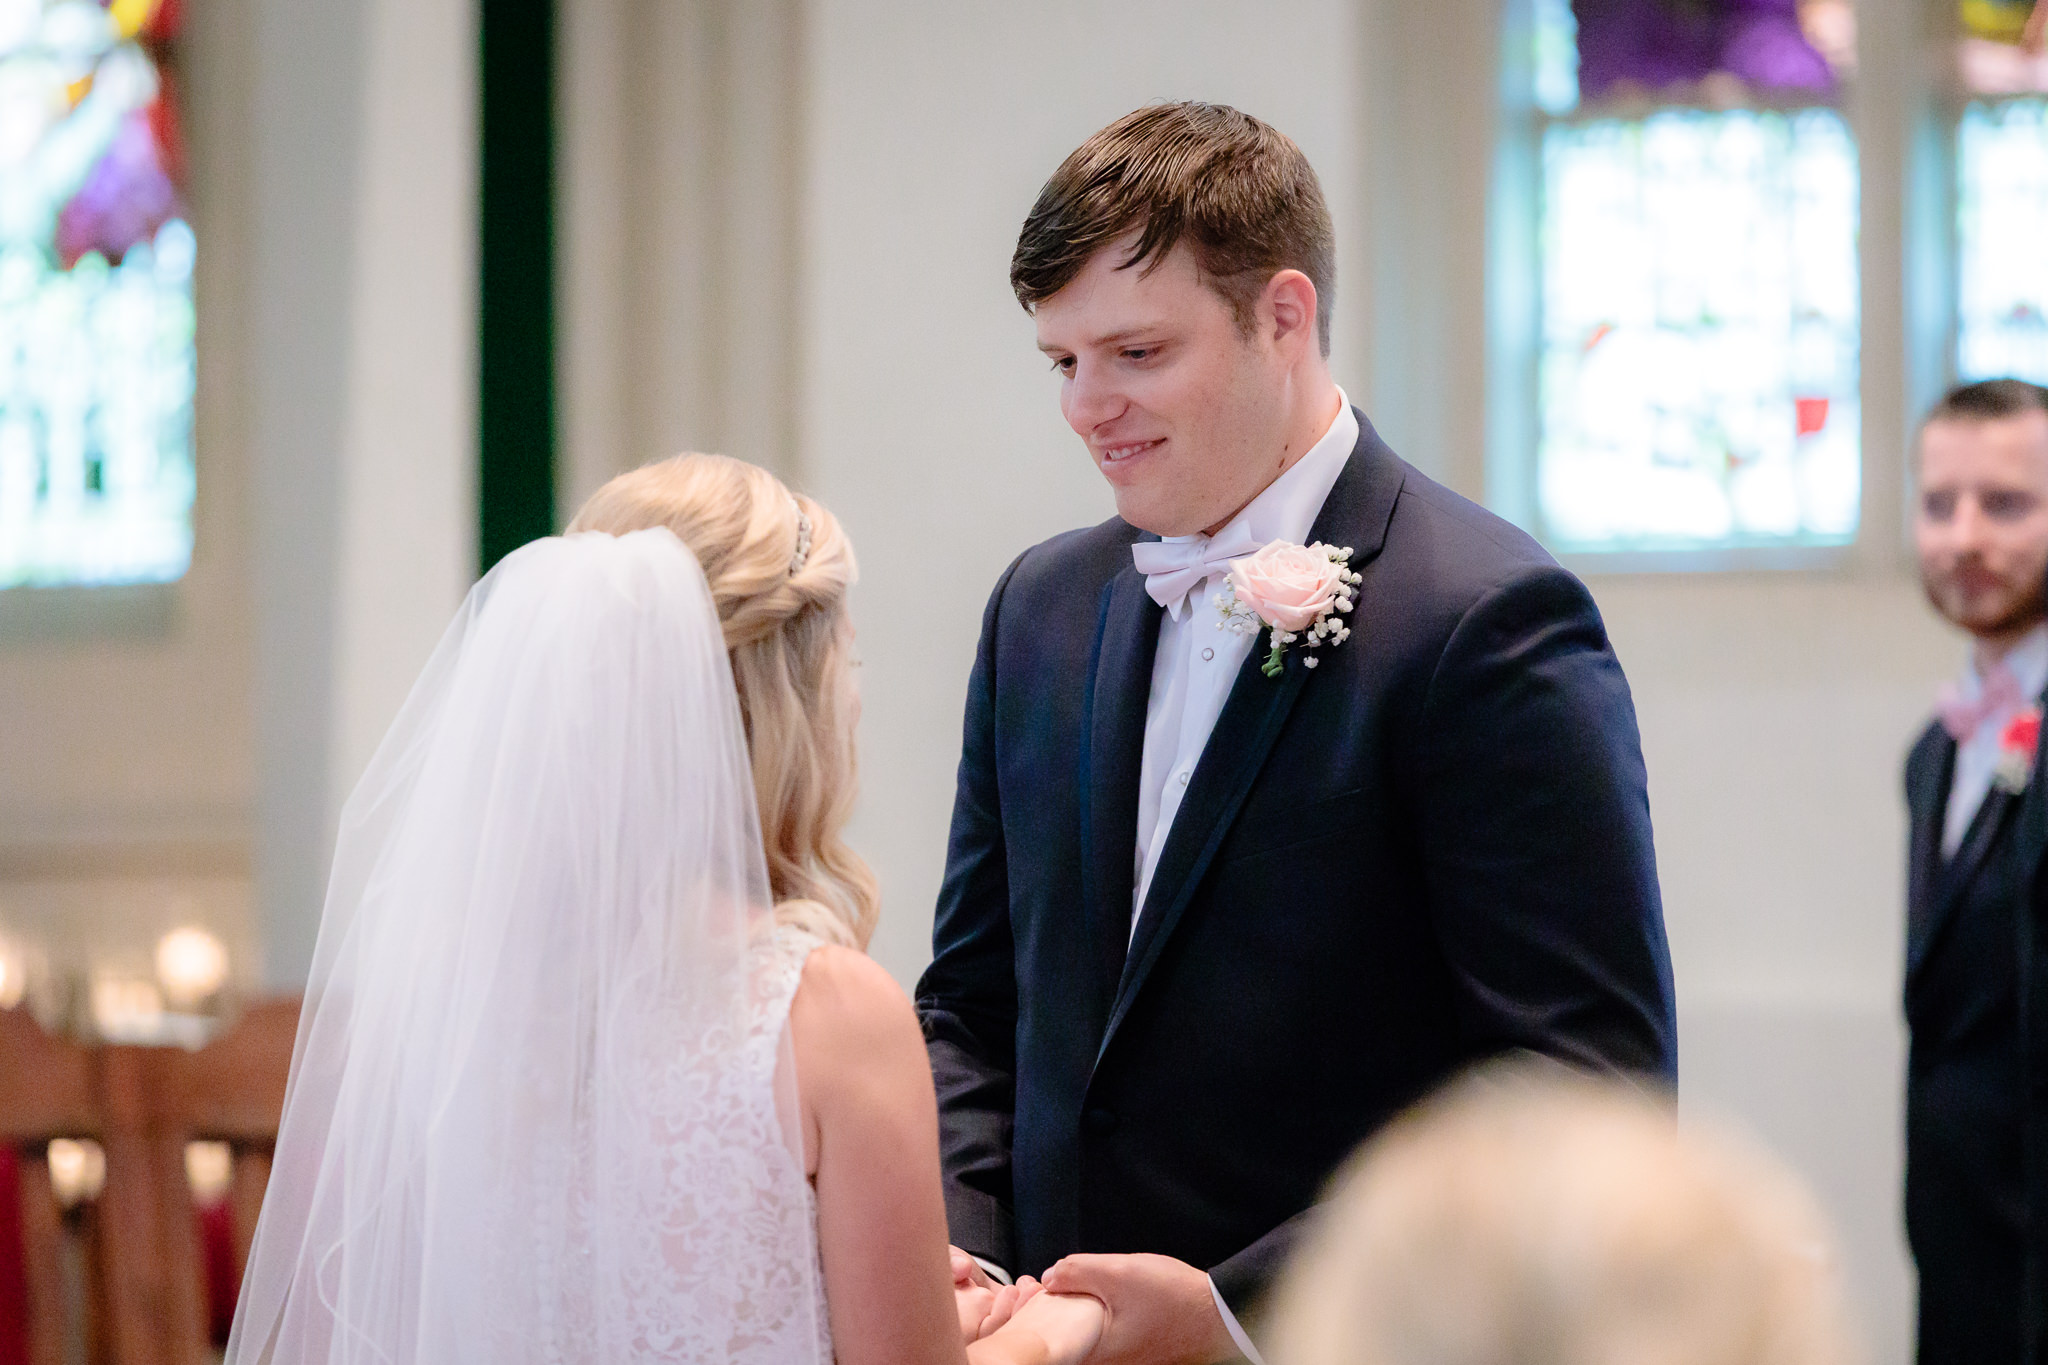 Groom smiles as bride says her vows at Duquesne University Chapel of the Holy Spirit